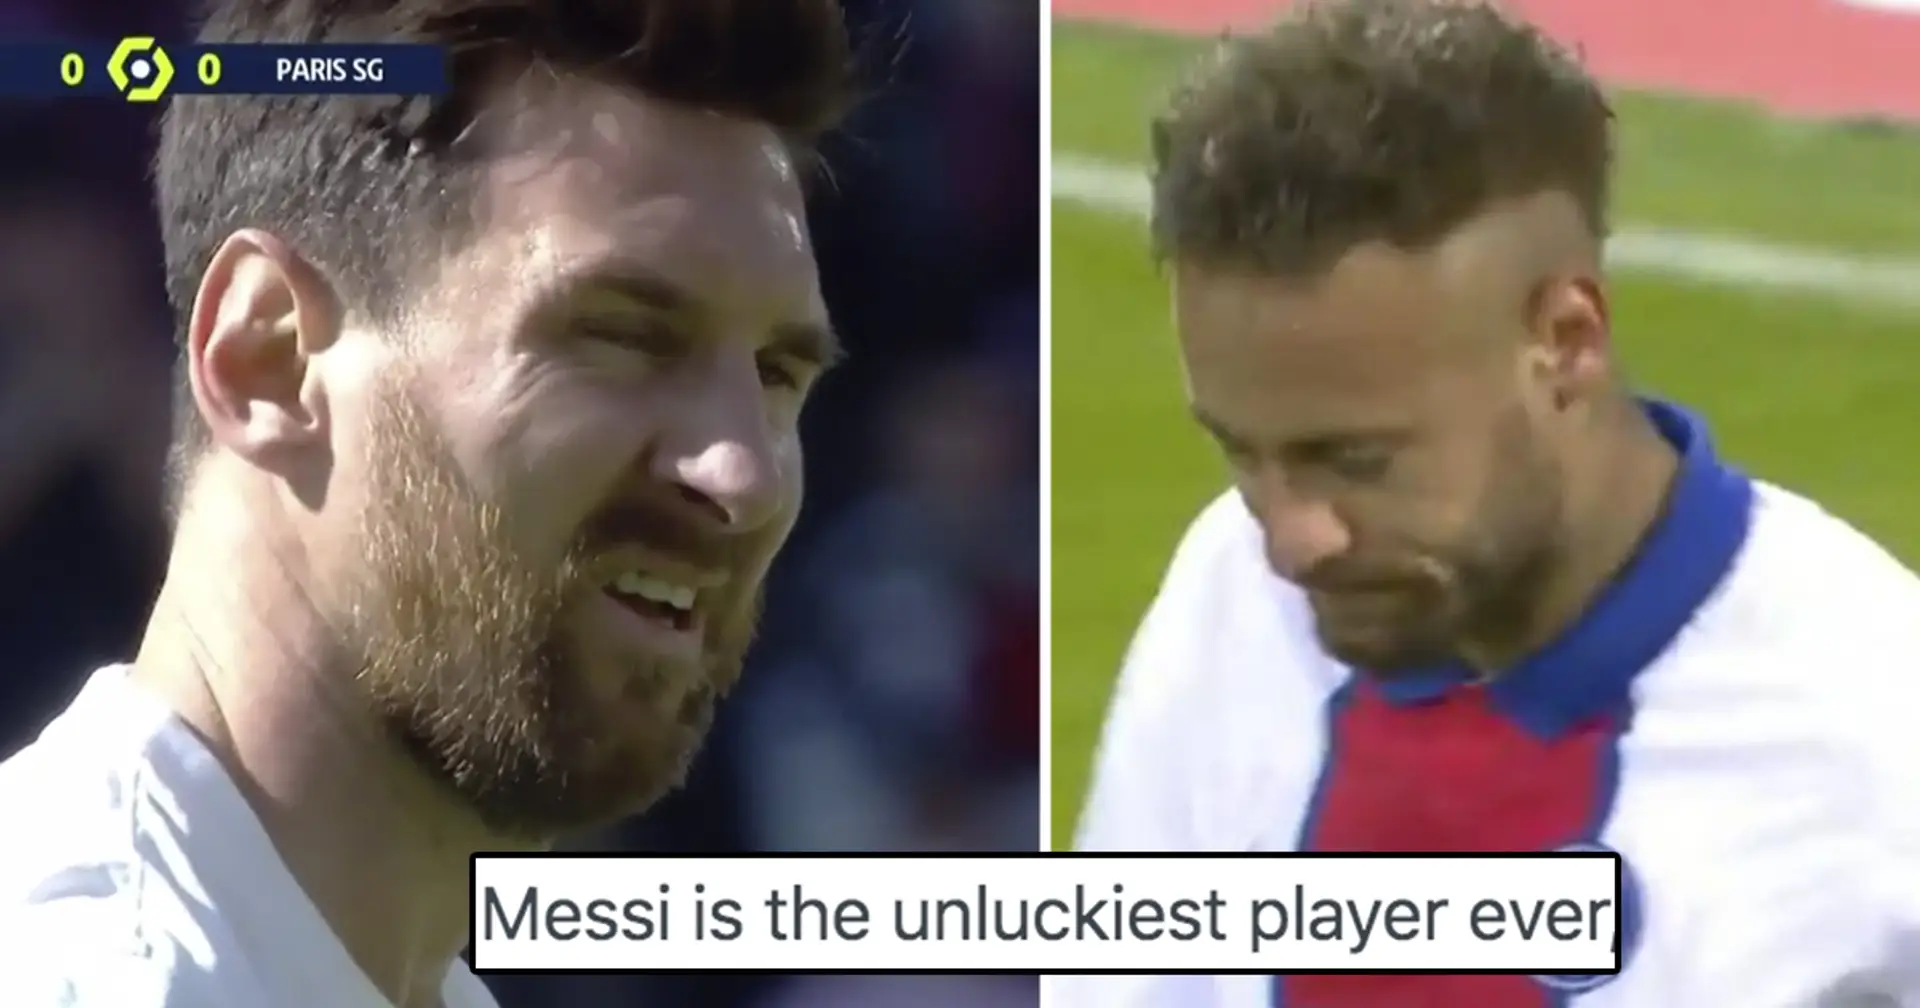 'He's about to go back to Barca': Global fans react as PSG lose despite splendid Messi performance